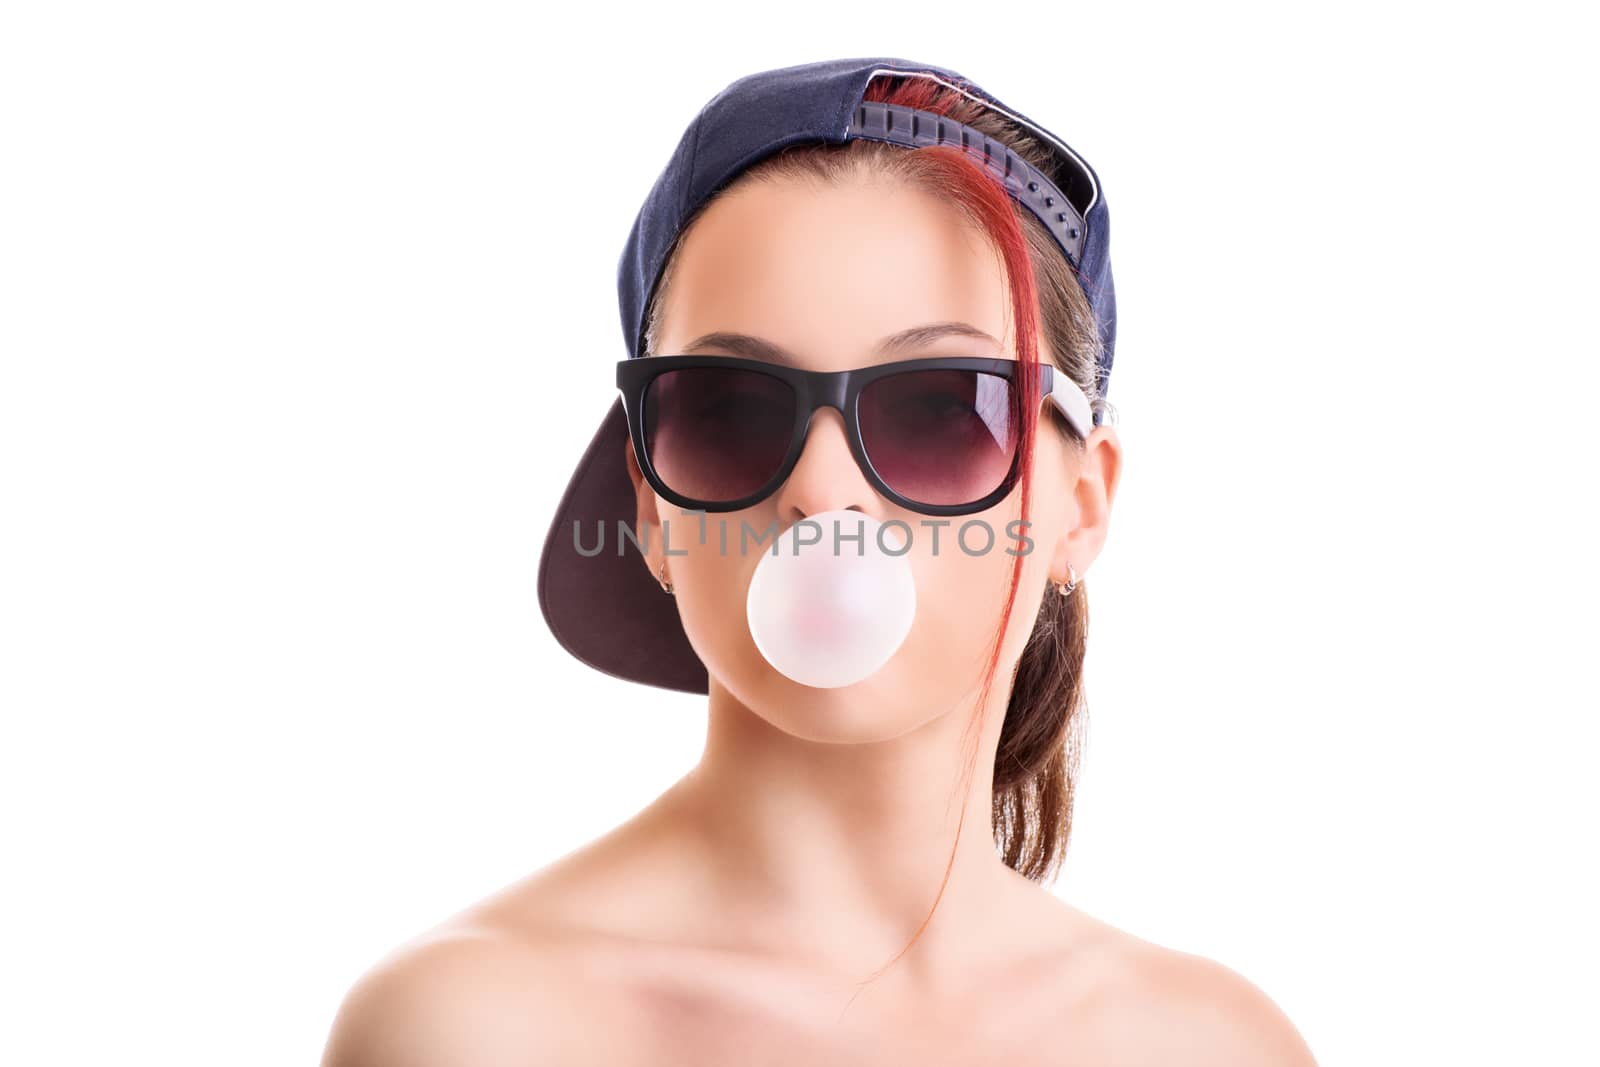 Beautiful stylish girl with backwards snapback cap and sunglasses, blowing a pink bubble with her chewing gum, isolated on white background.